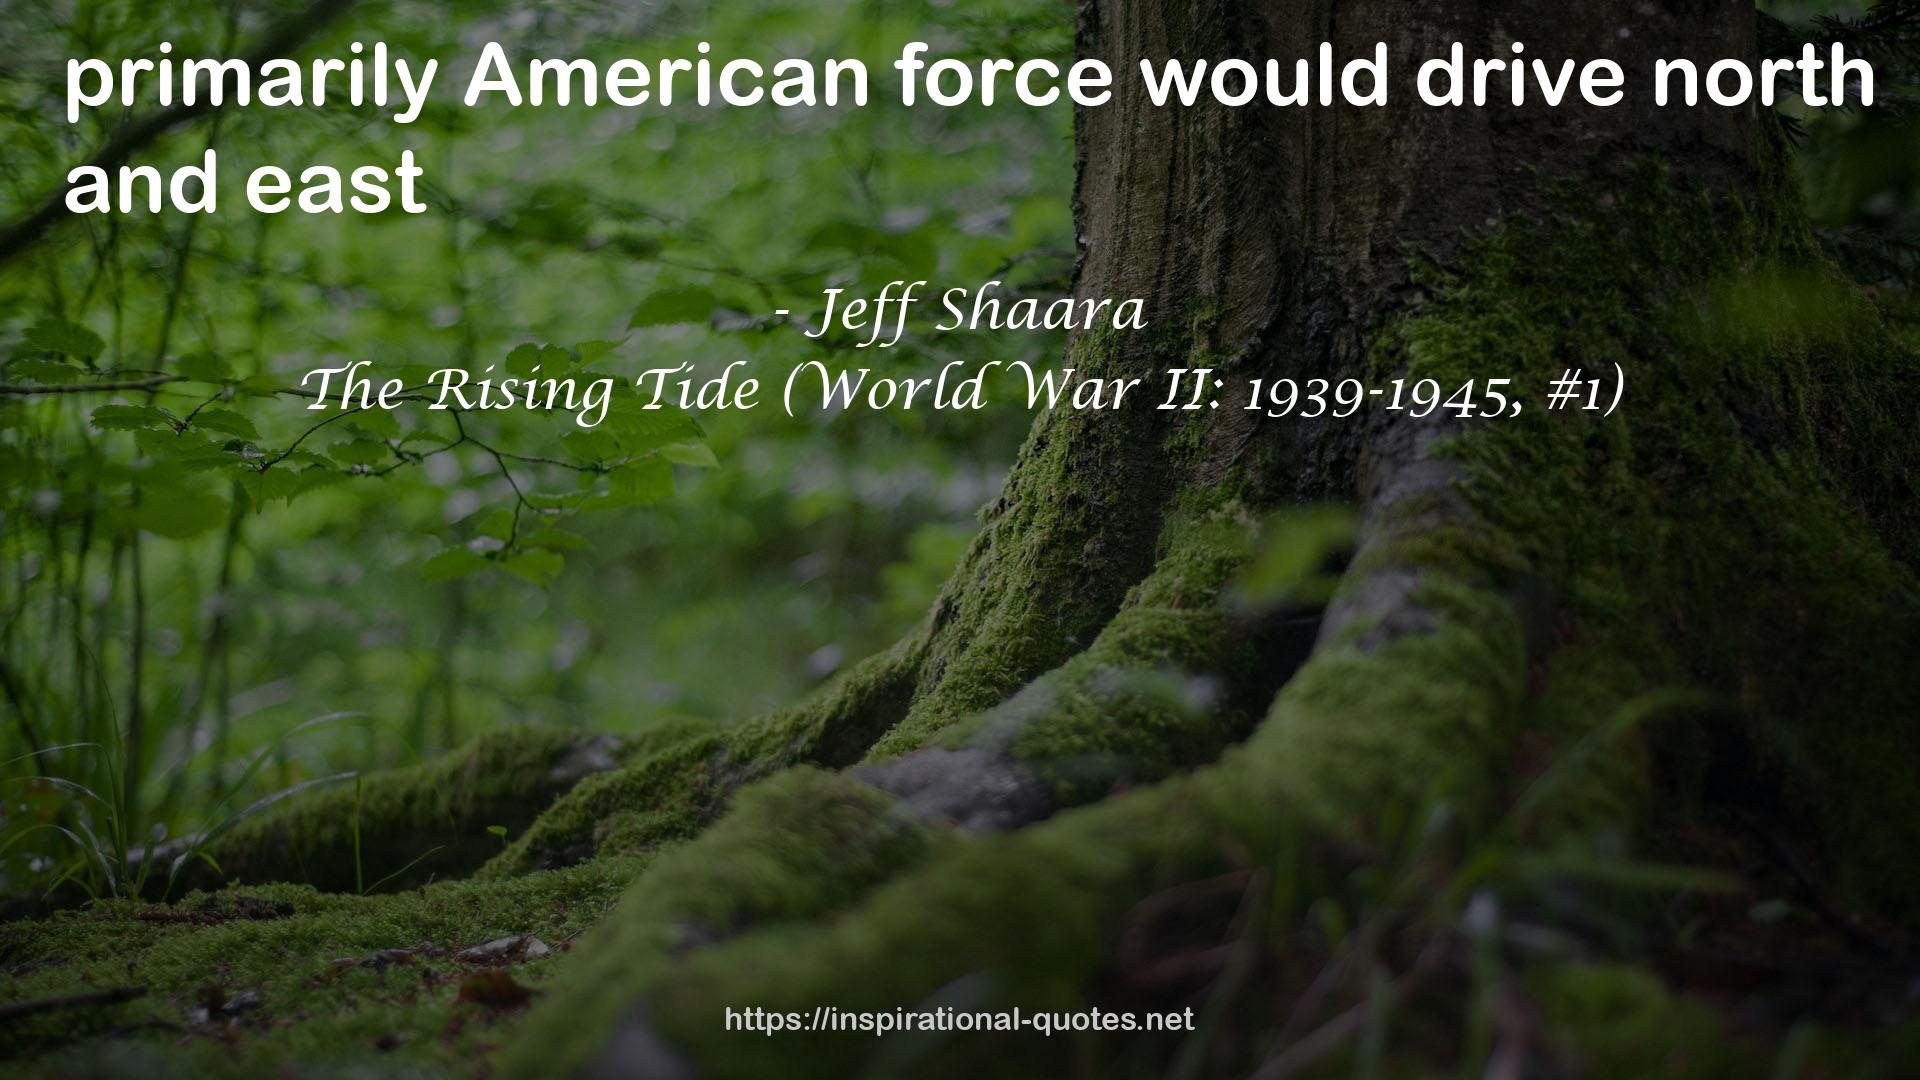 The Rising Tide (World War II: 1939-1945, #1) QUOTES